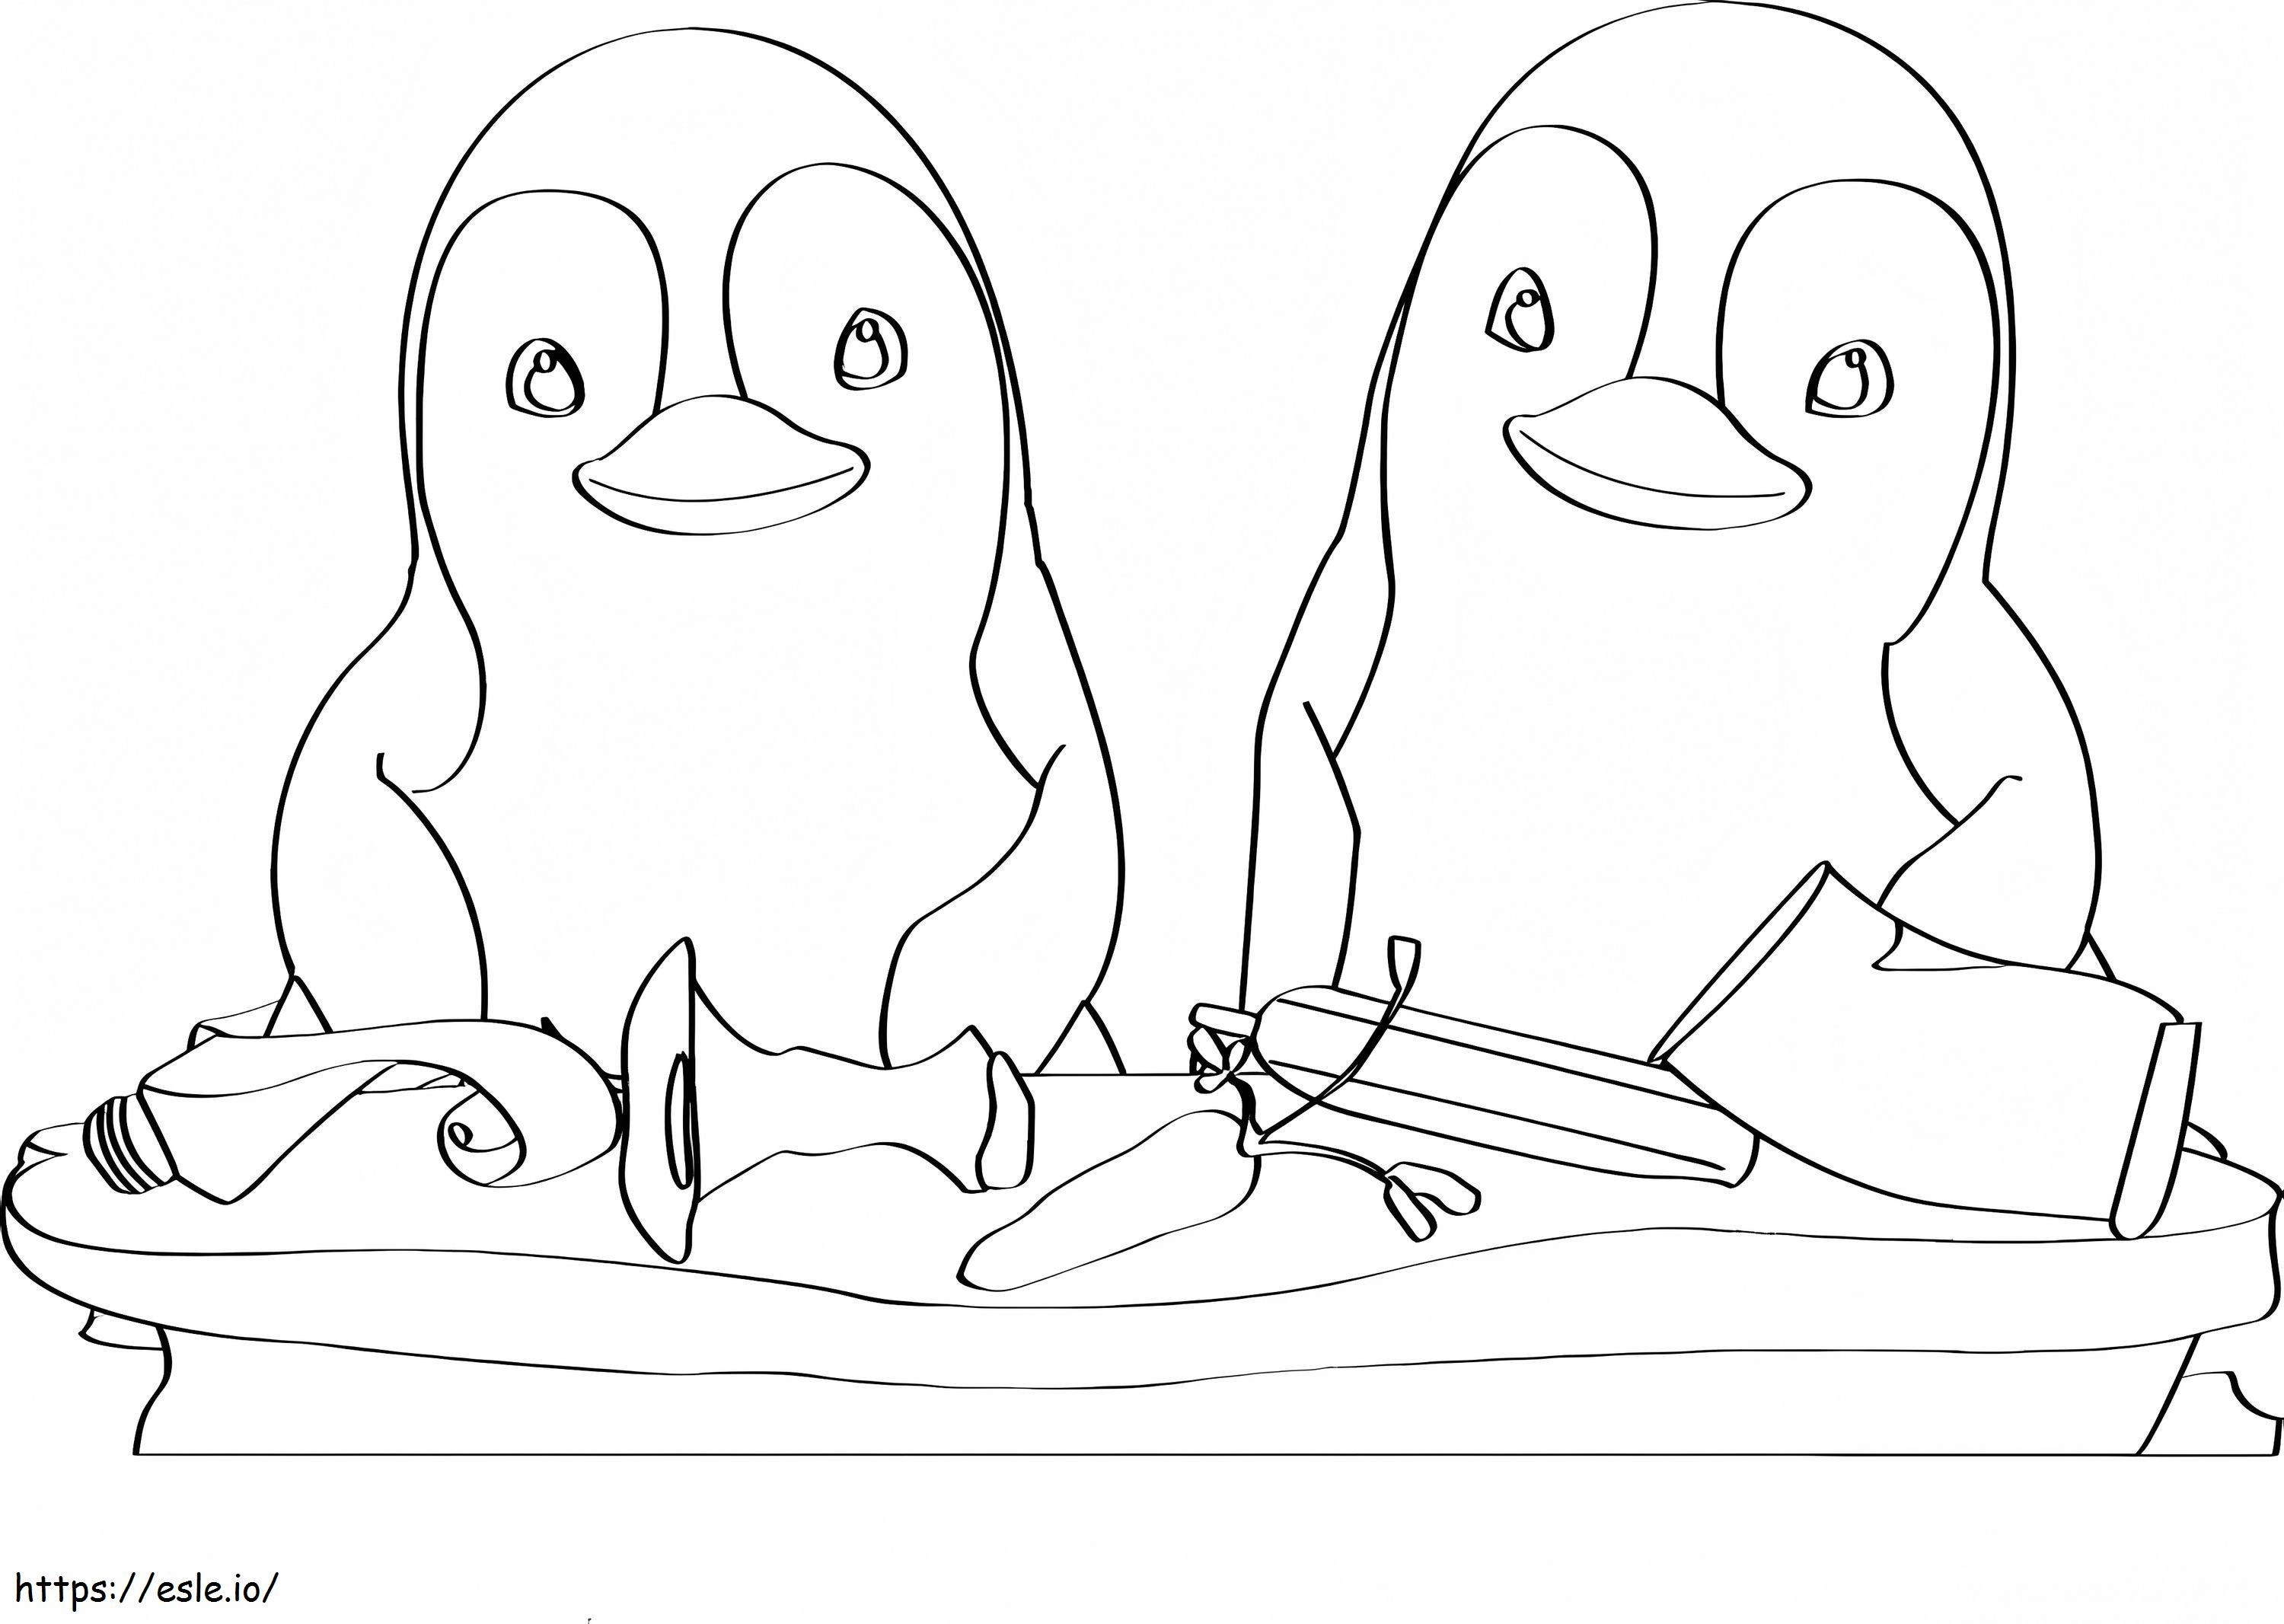 Ozie Boo 5 coloring page